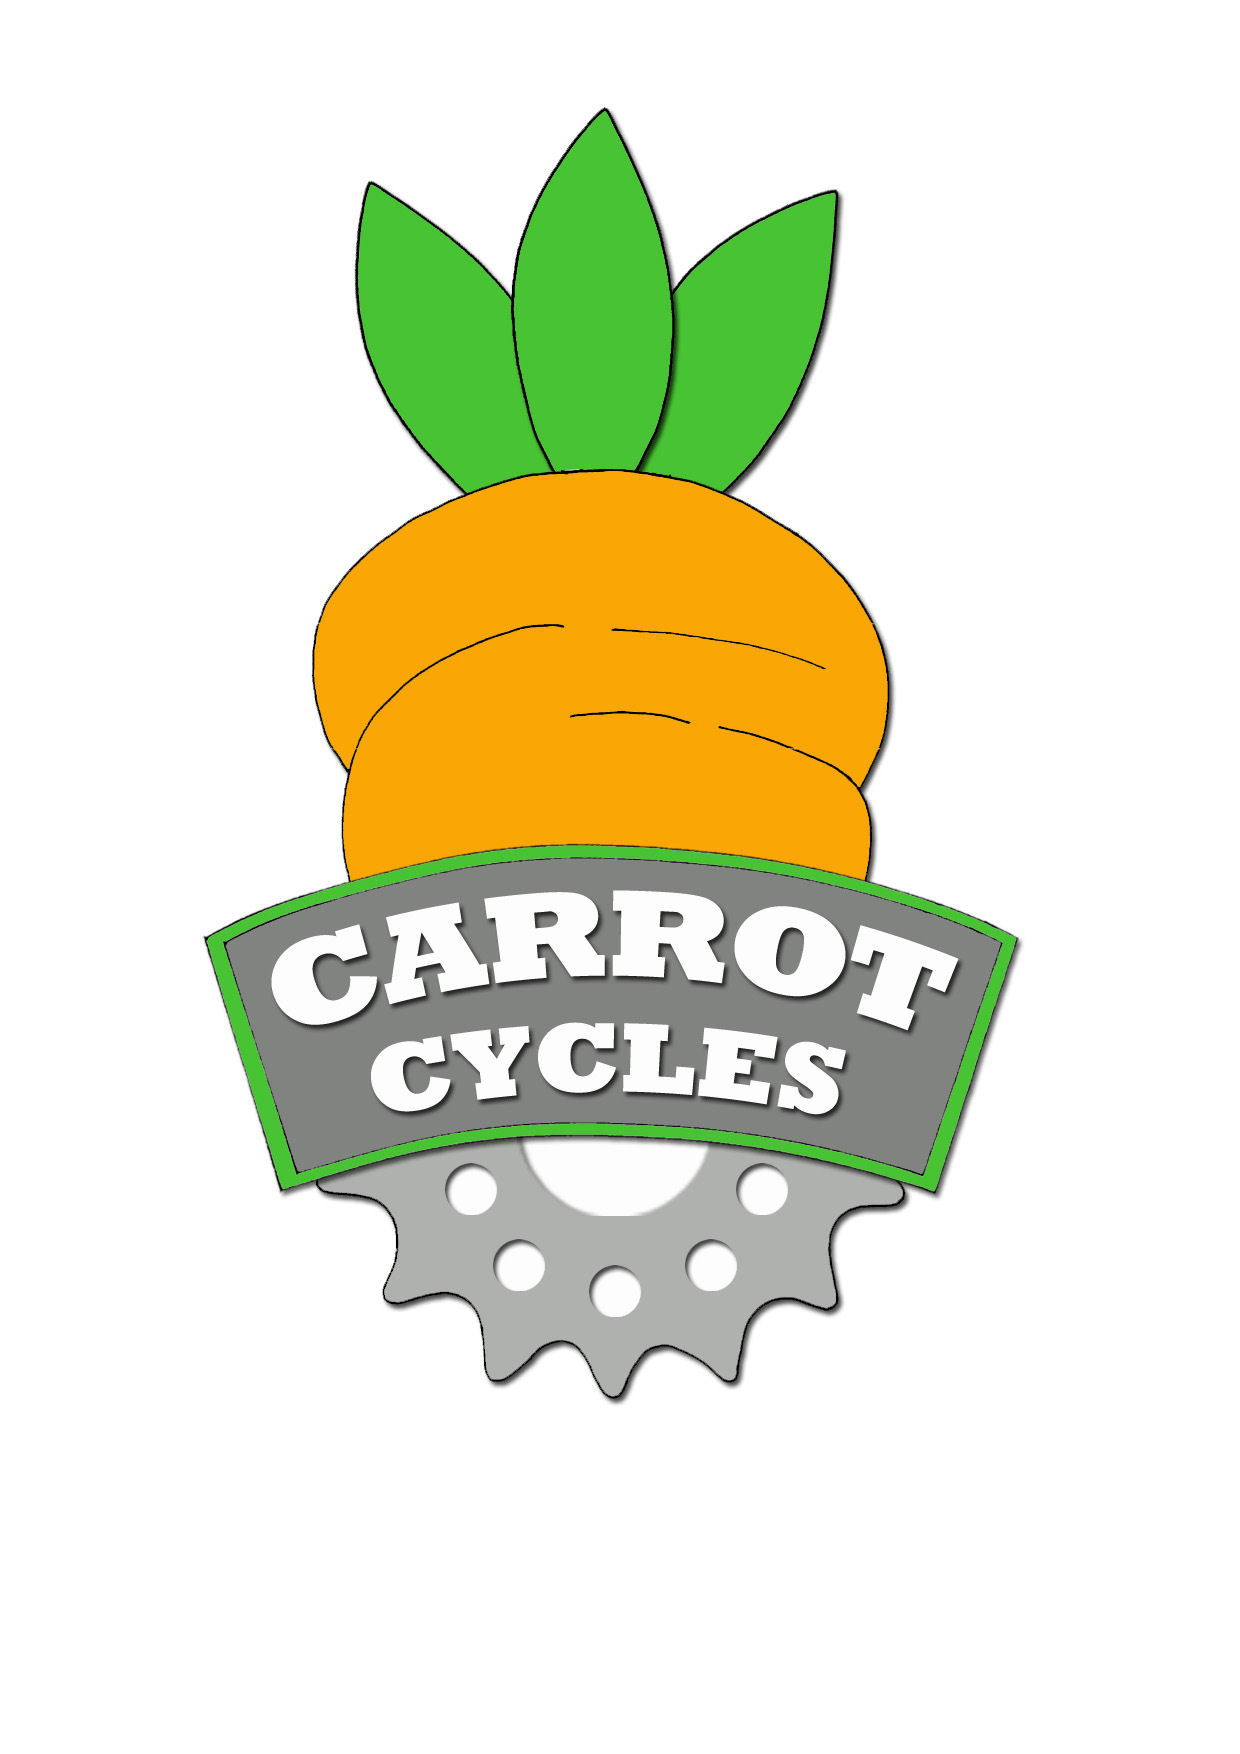 Carrot Cycles (Lincoln) Ltd